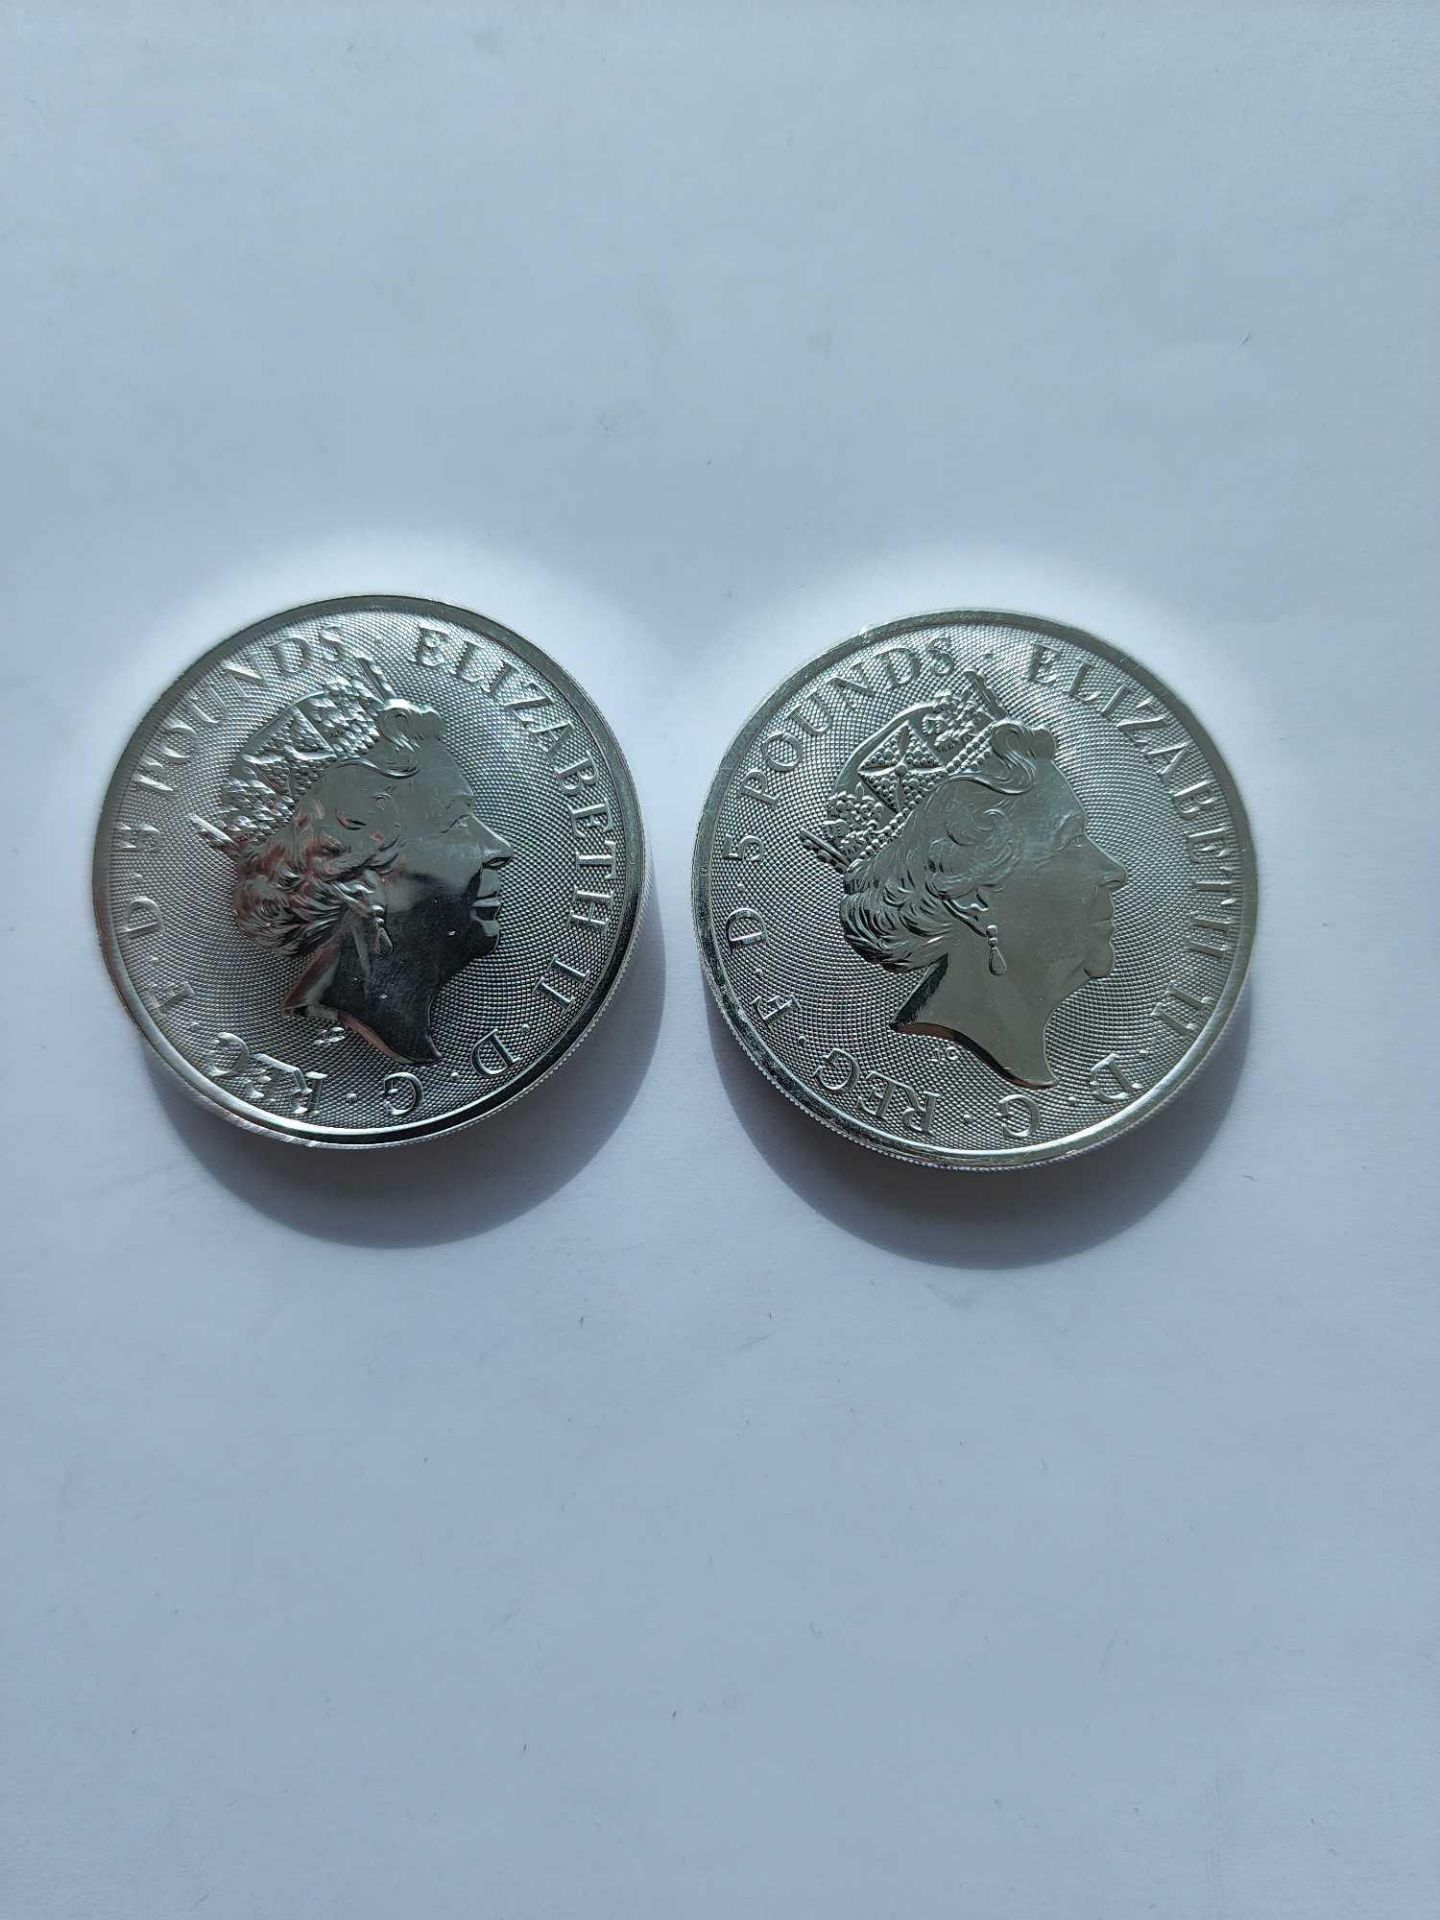 The Queens Beasts and Greyhound 2 coin set (4 oz total) - Image 4 of 4